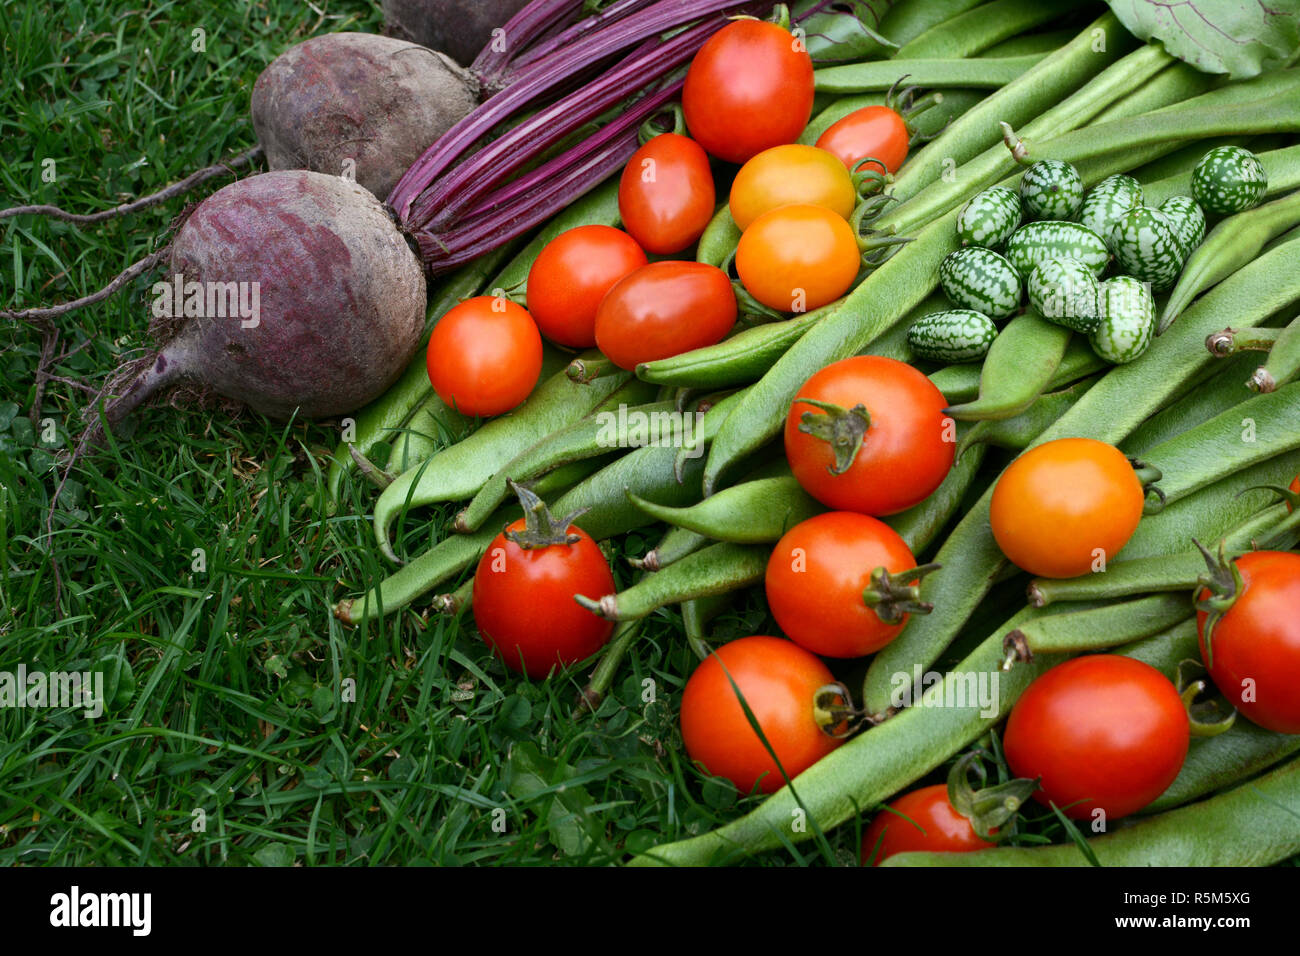 Harvested vegetables from the allotment Stock Photo